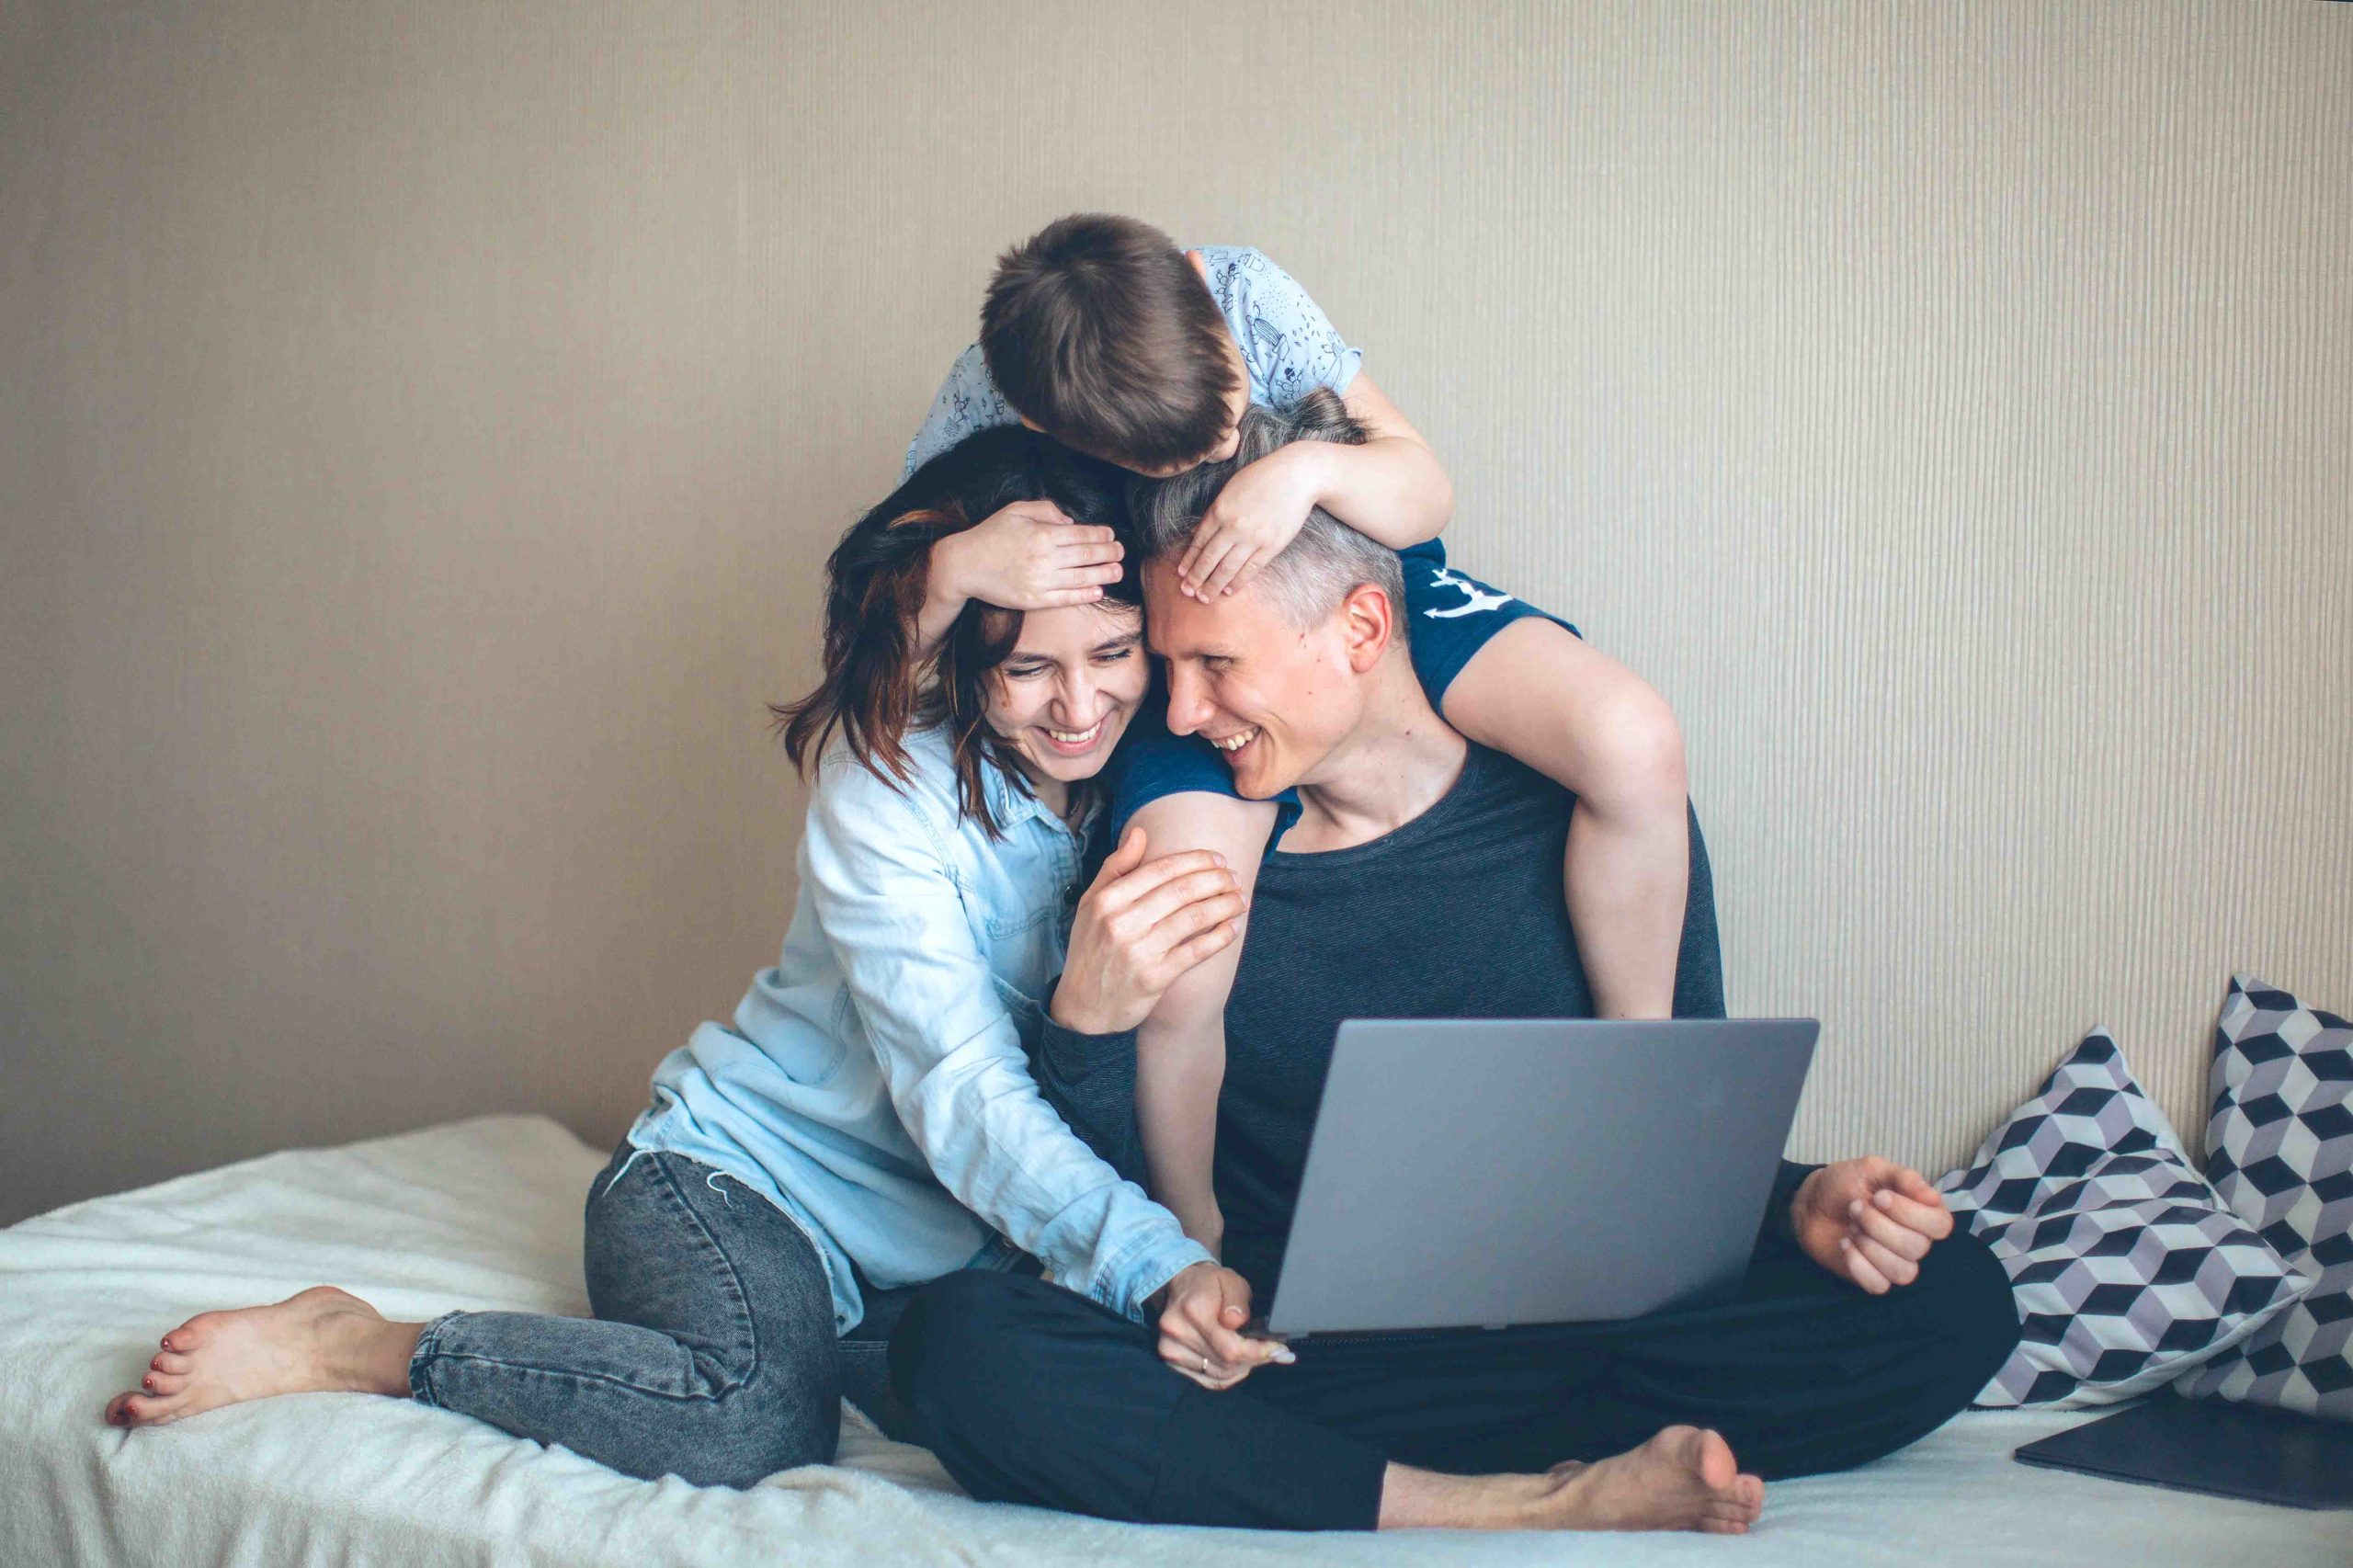 Parents Ultimate Guide to Virtual Playdates During Social Distancing